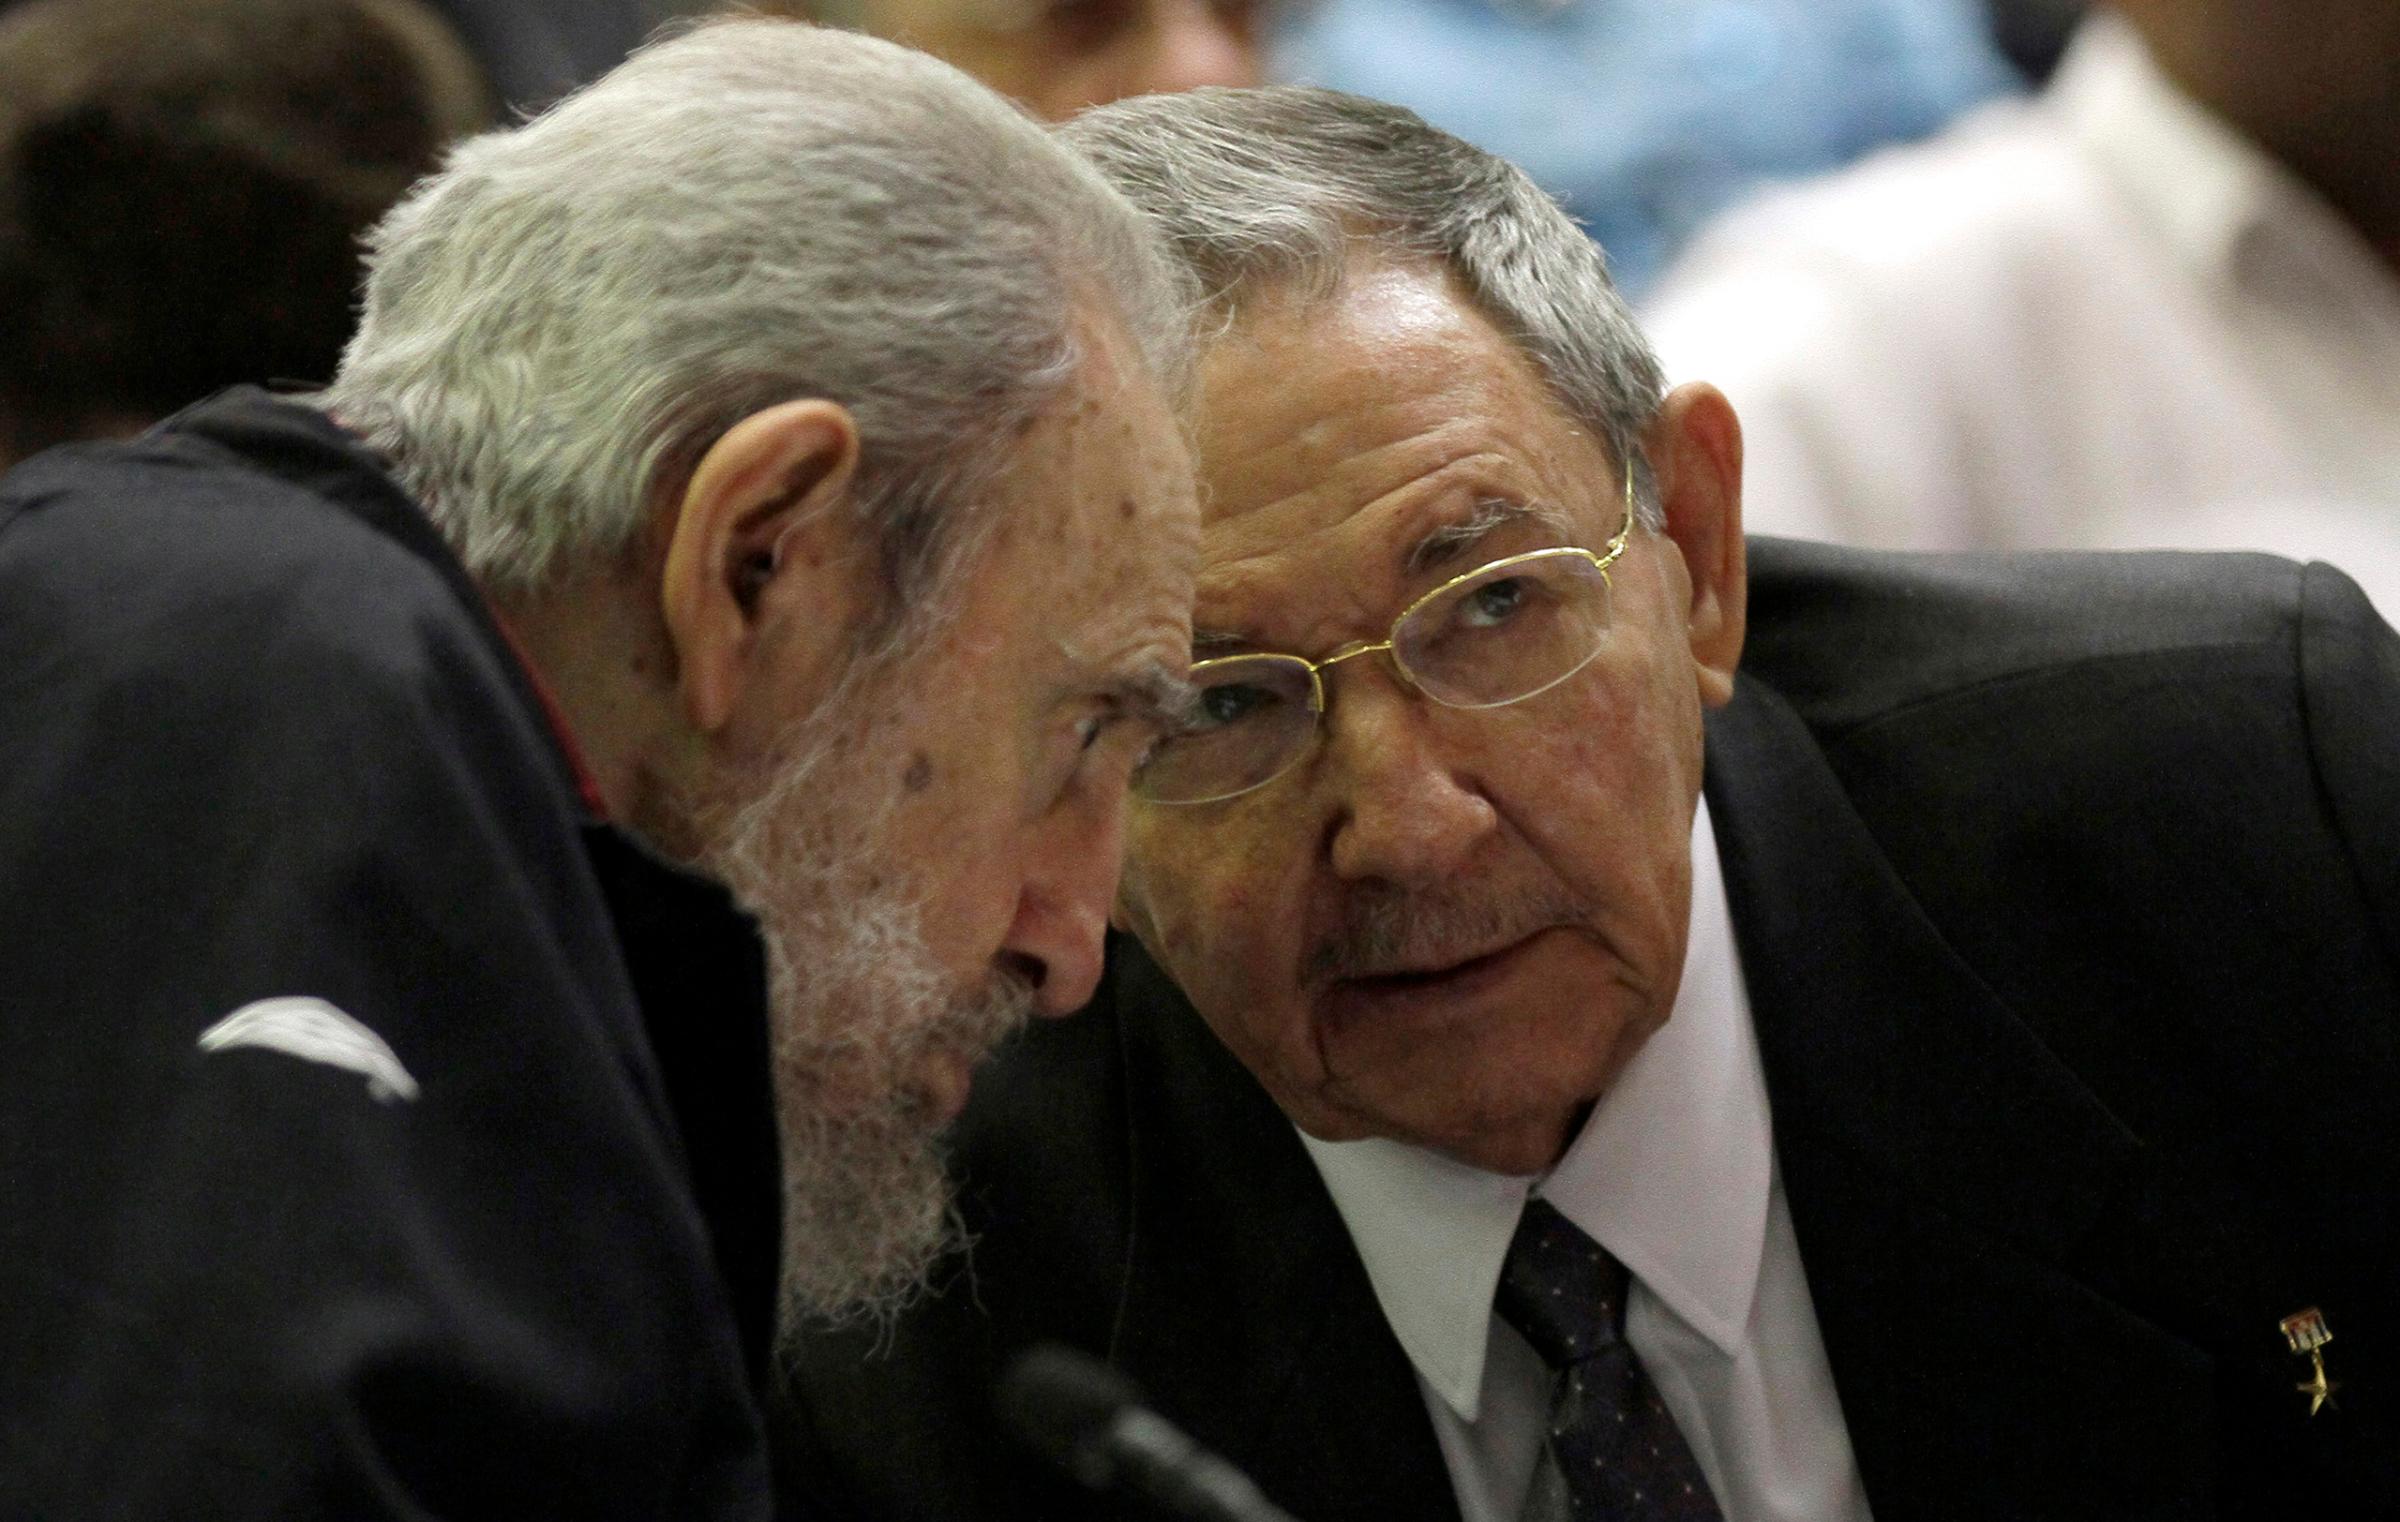 Cuban President Raul Castro speaks with his brother, Fidel Castro, during the opening session of the National Assembly in Havana on Feb. 24, 2012. Raul Castro was named to a new five-year-term as president.